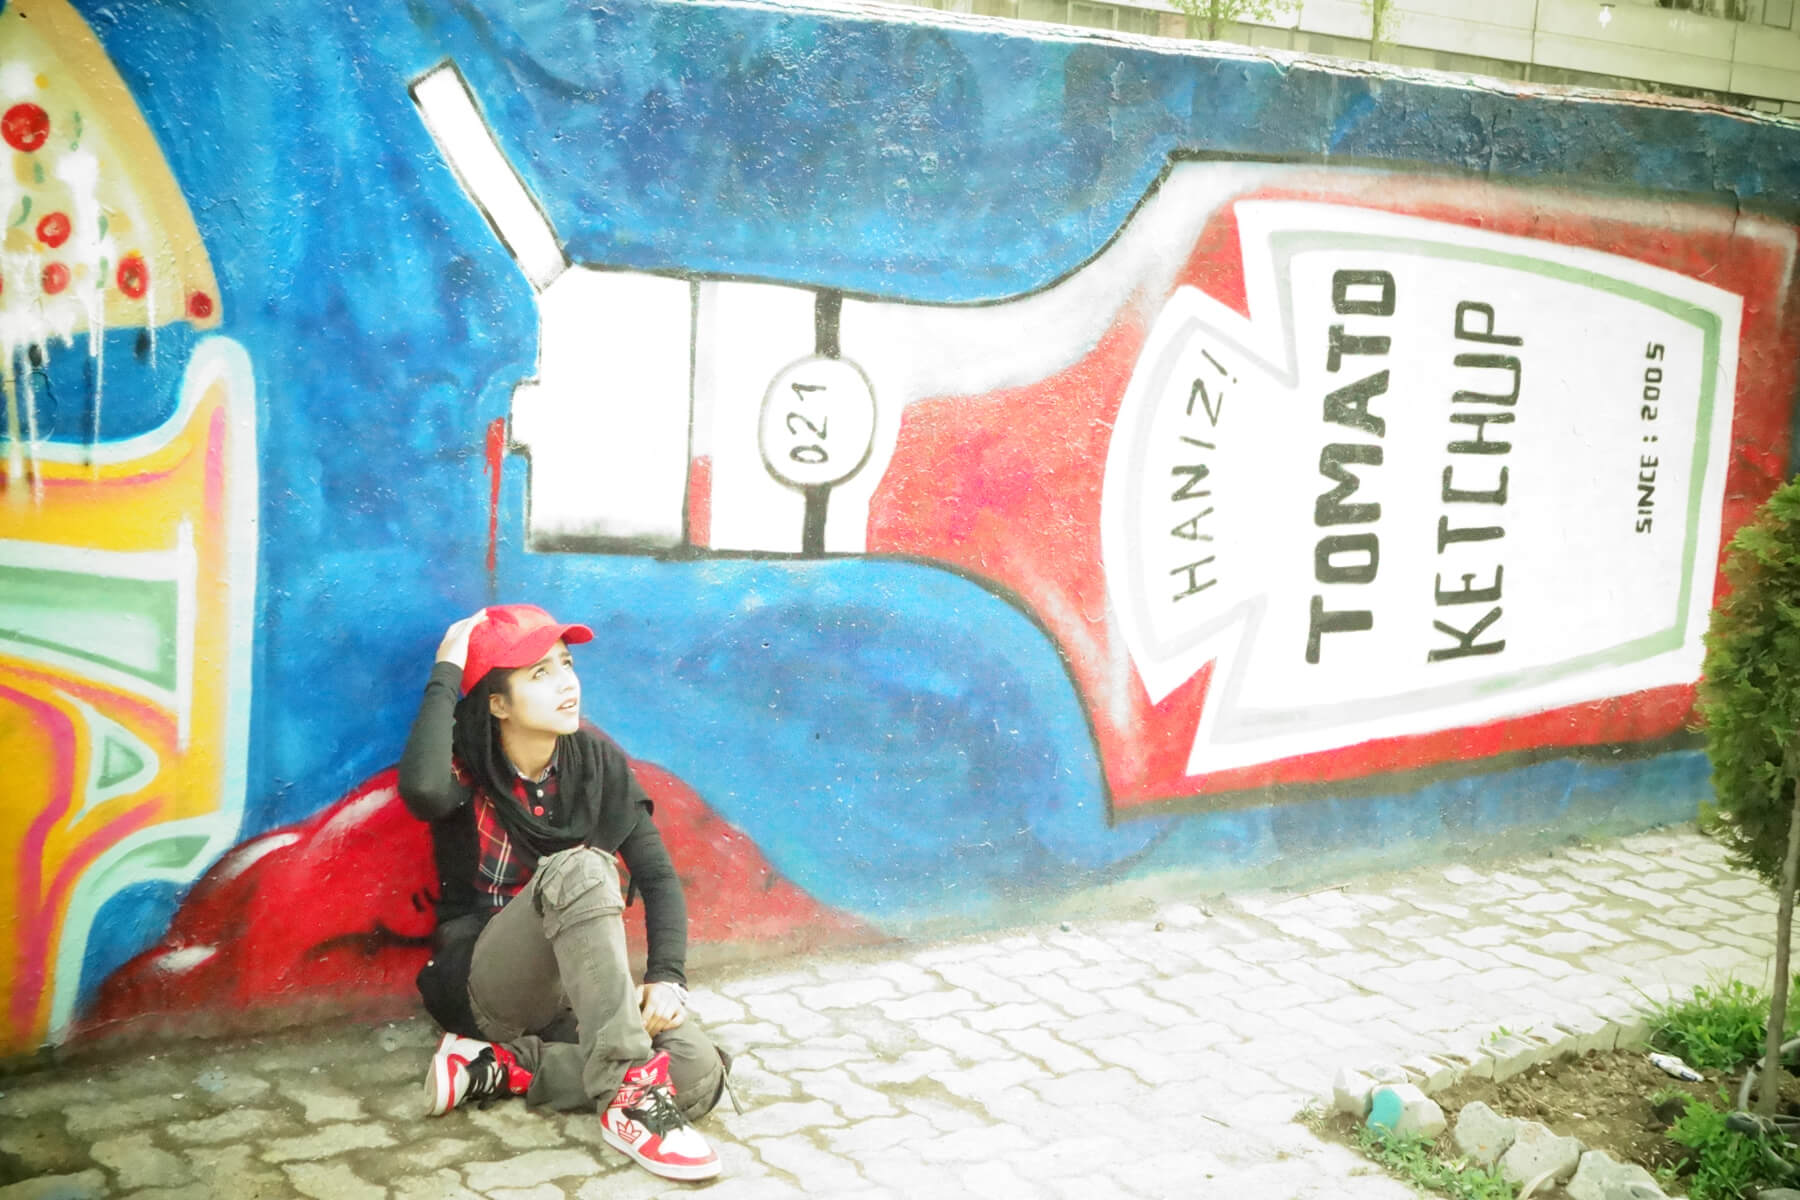 Sonita sitting on the ground in front of a wall with a mural of a ketchup bottle.